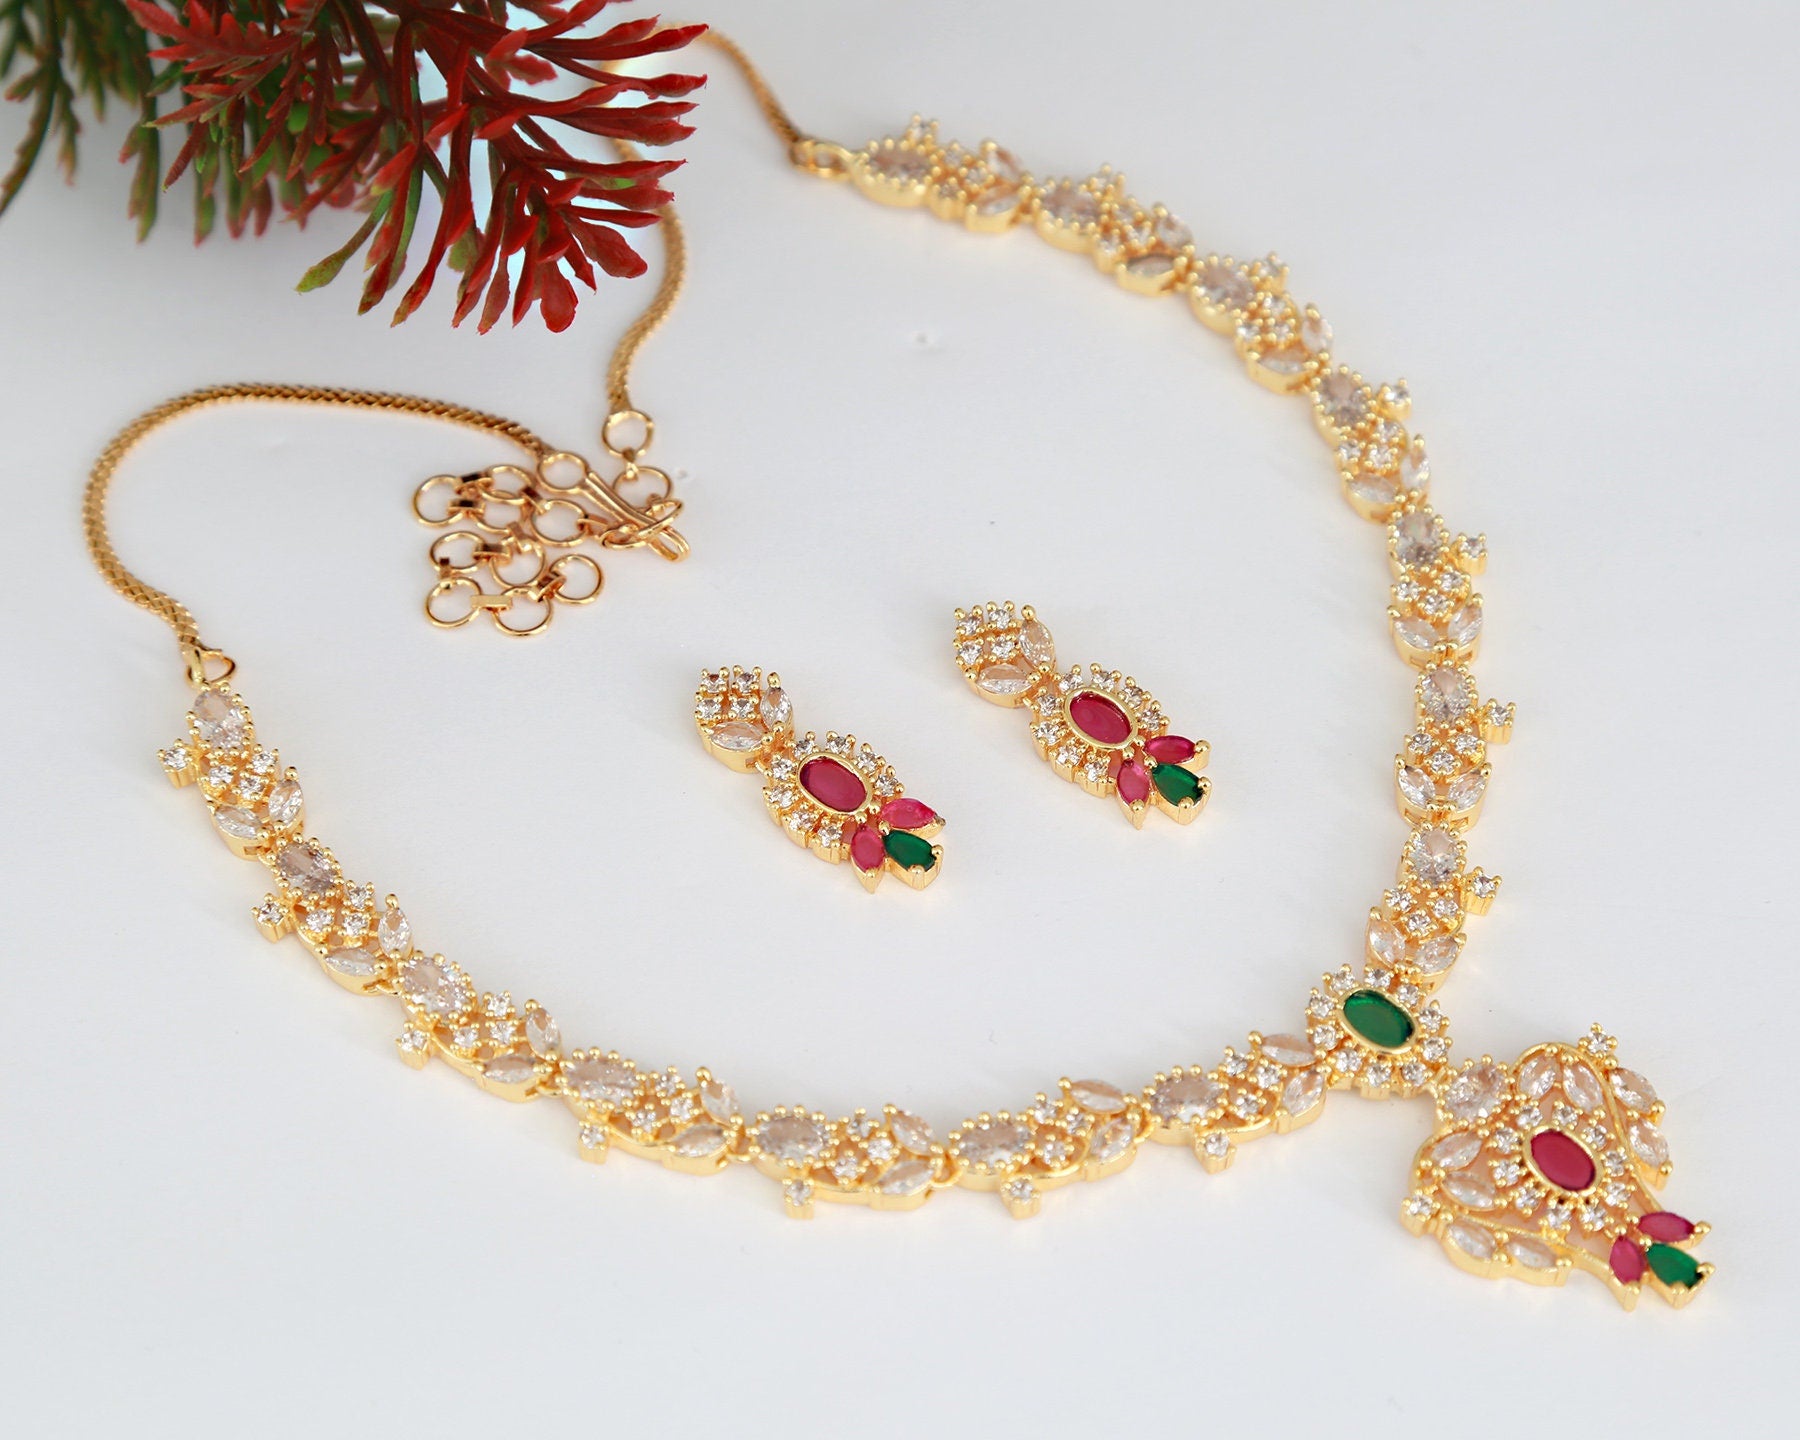 American Diamond necklace Earrings |Gold Plated emerald necklace Floral pattern |Beautiful Ruby necklace Floral design |Clear stone necklace